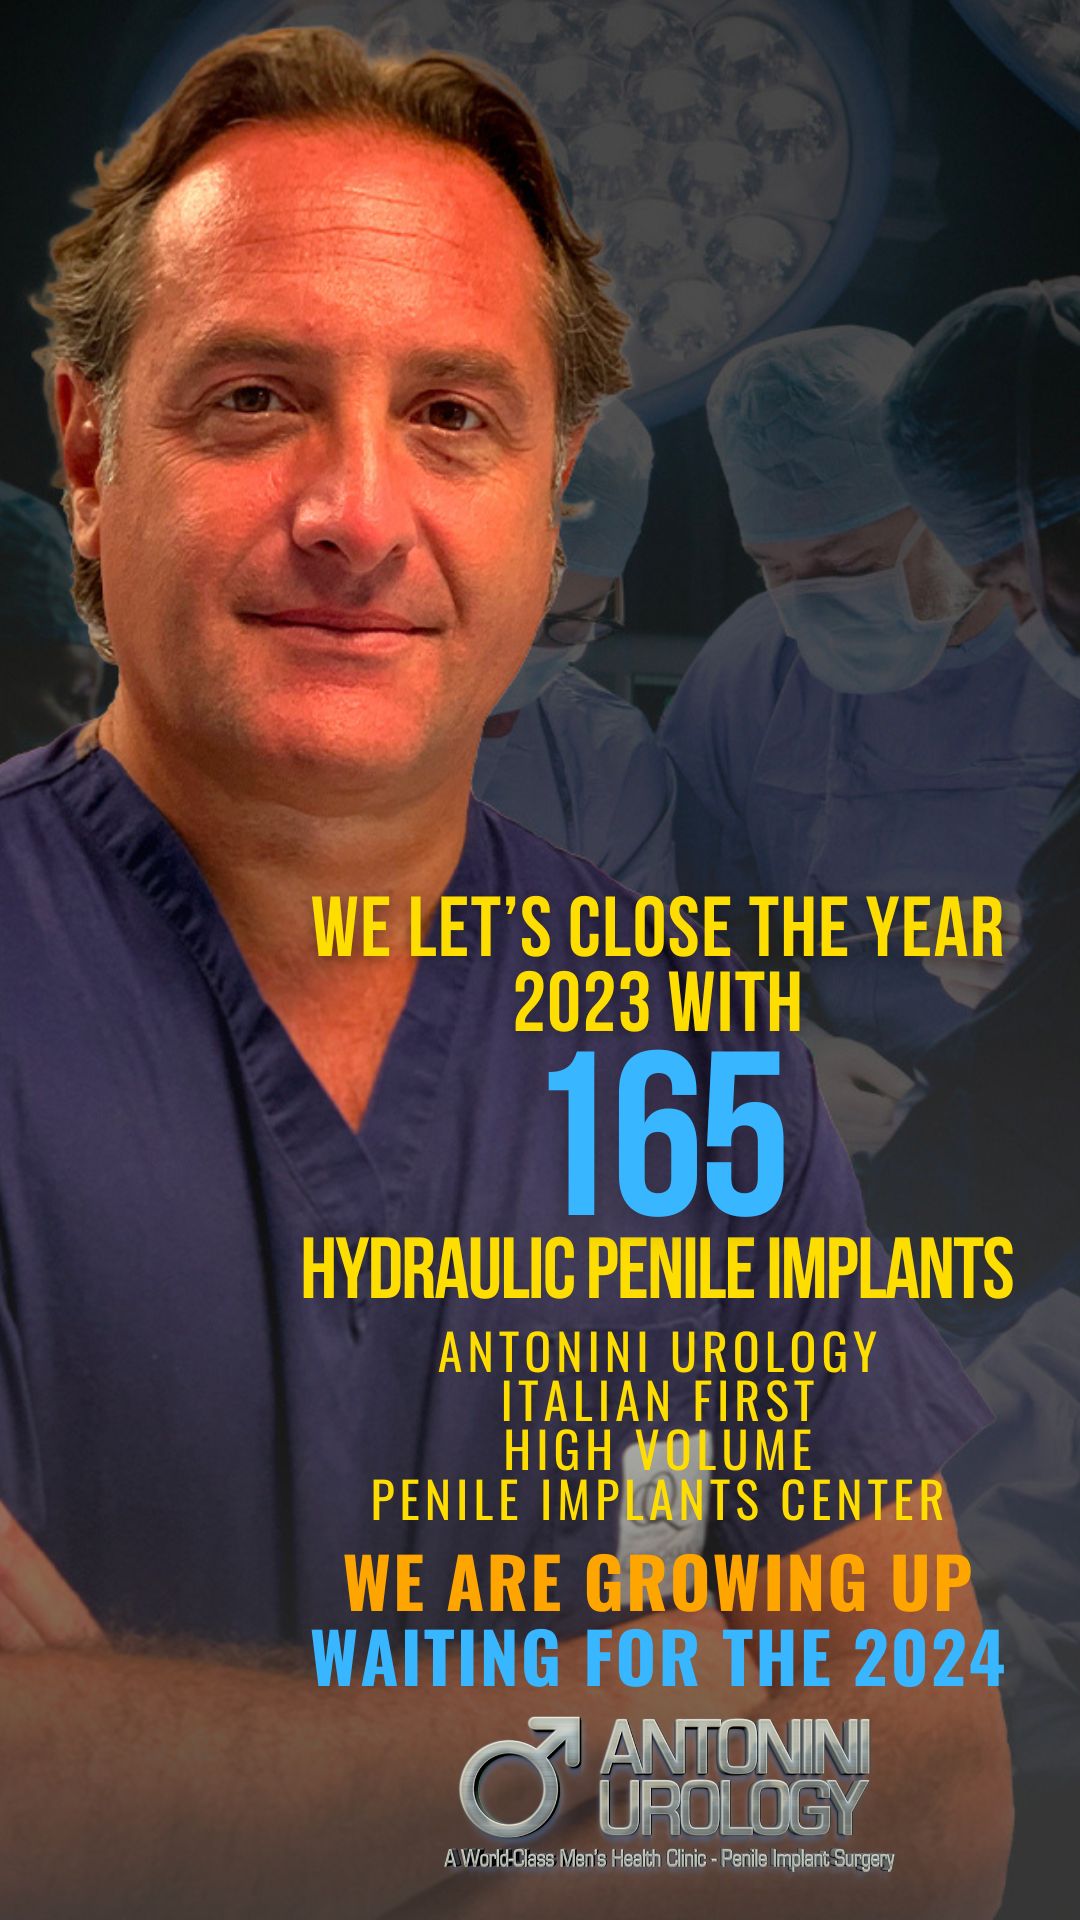 Antonini Urology: Leading in Italy for Tricomponent Penile Prosthesis Implants